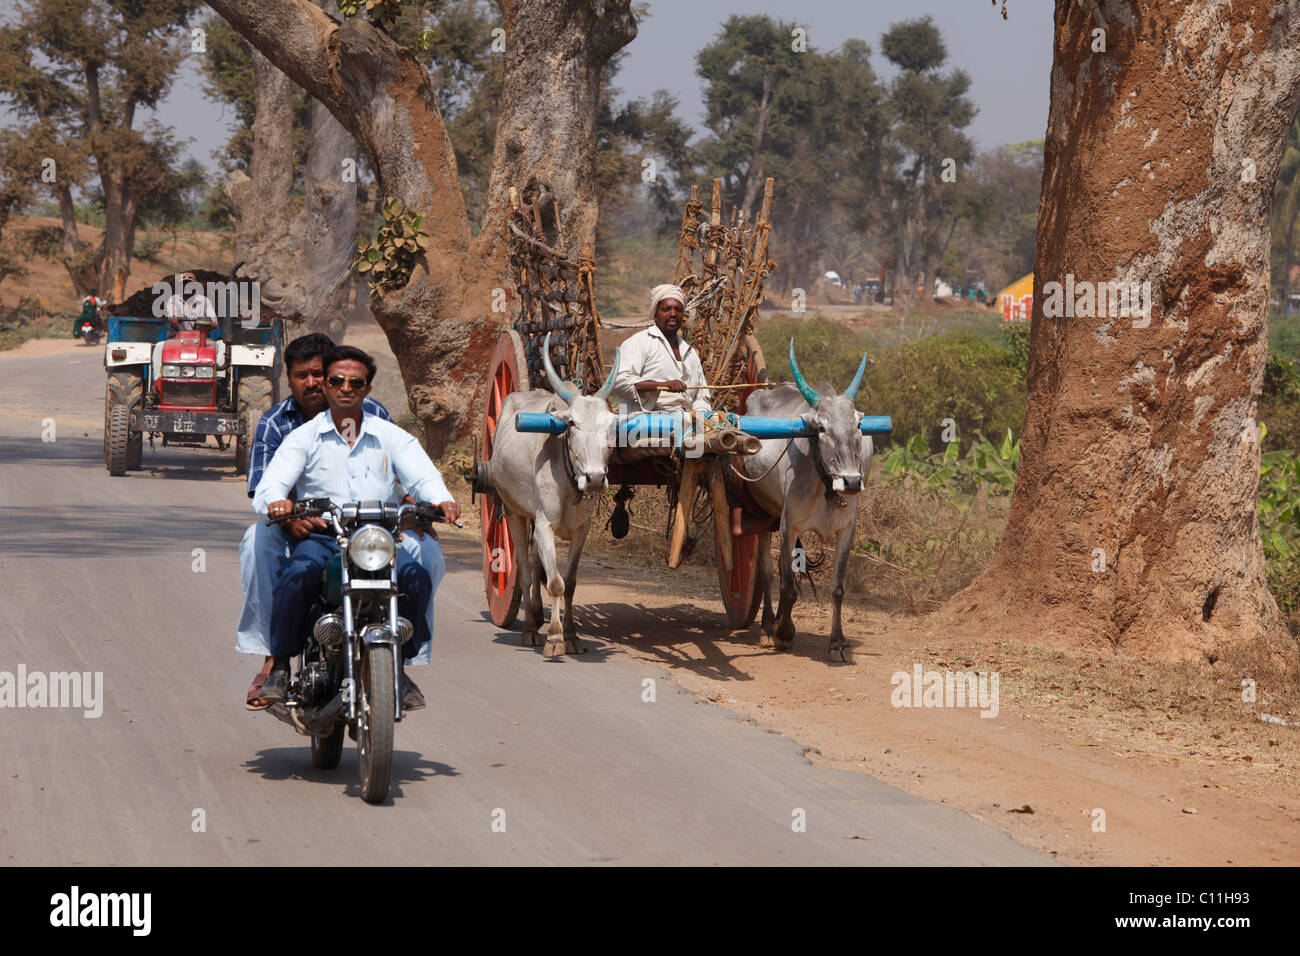 Traffic with motorcycle, ox cart and tractor on country road, Karnataka, South India, India, South Asia, Asia Stock Photo